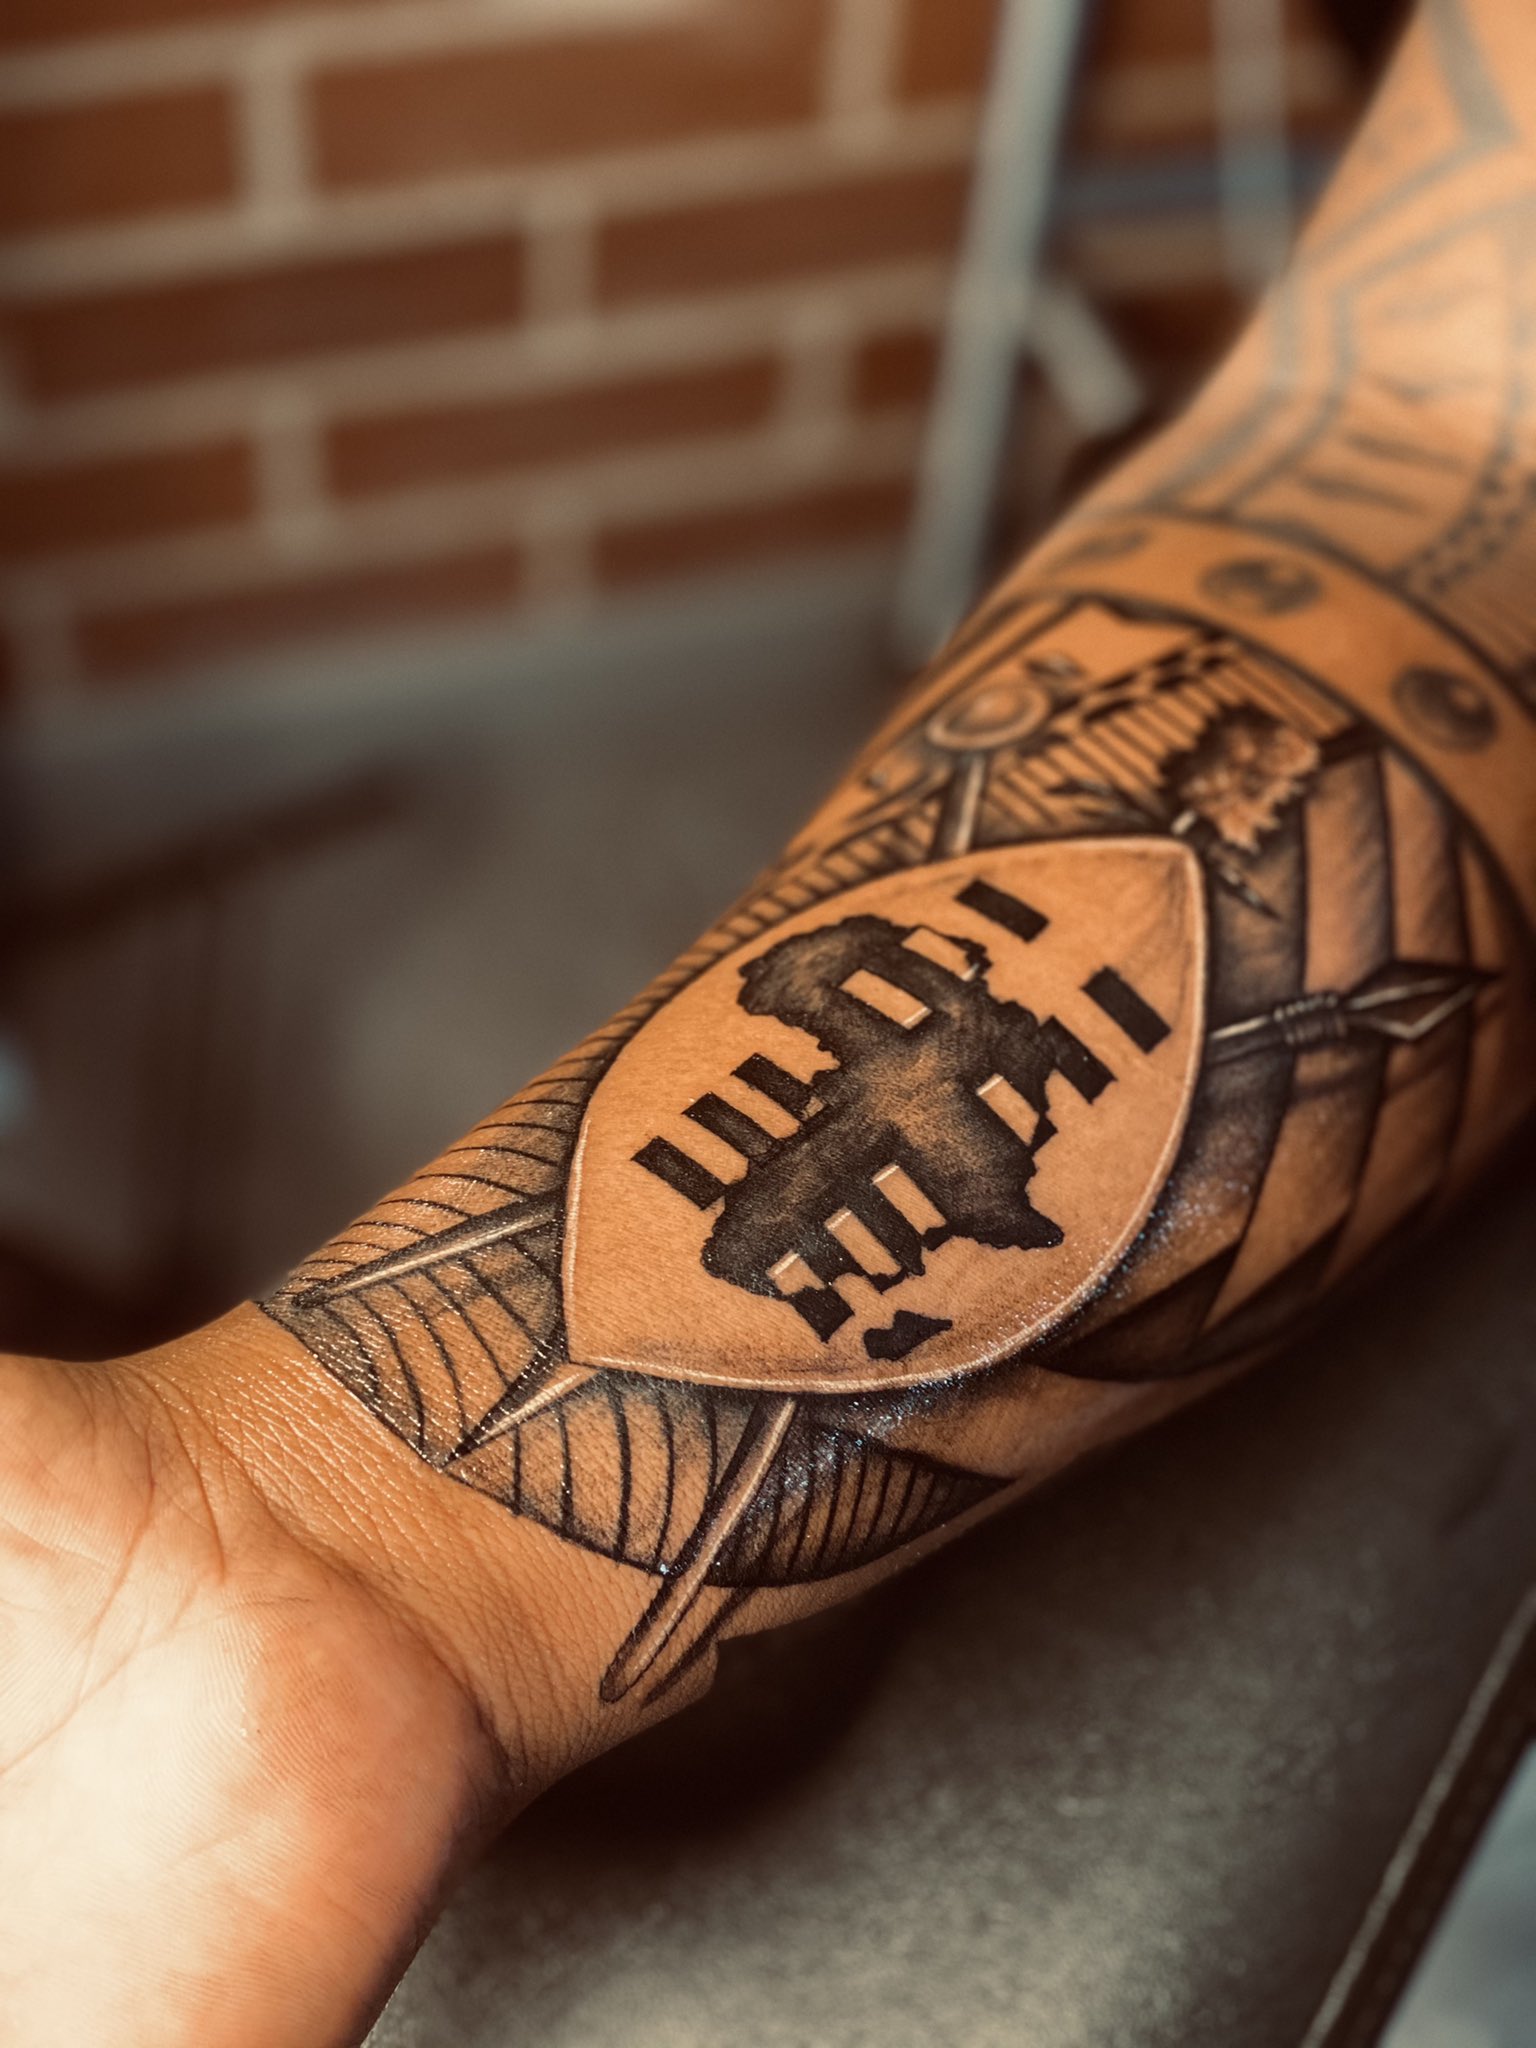 80 Tribal Tattoo Designs for Men  Meaning  The Trend Spotter